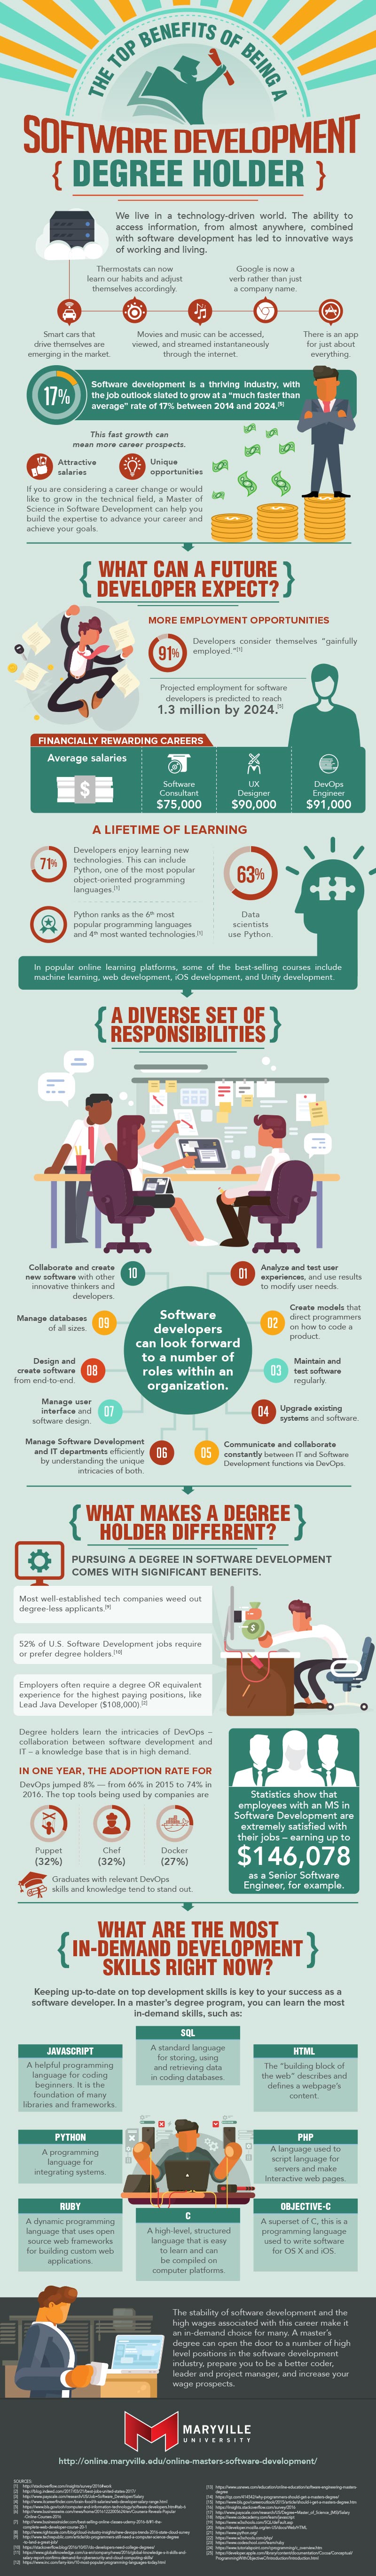 An infographic about the benefits of the software development degree by Maryville Online.